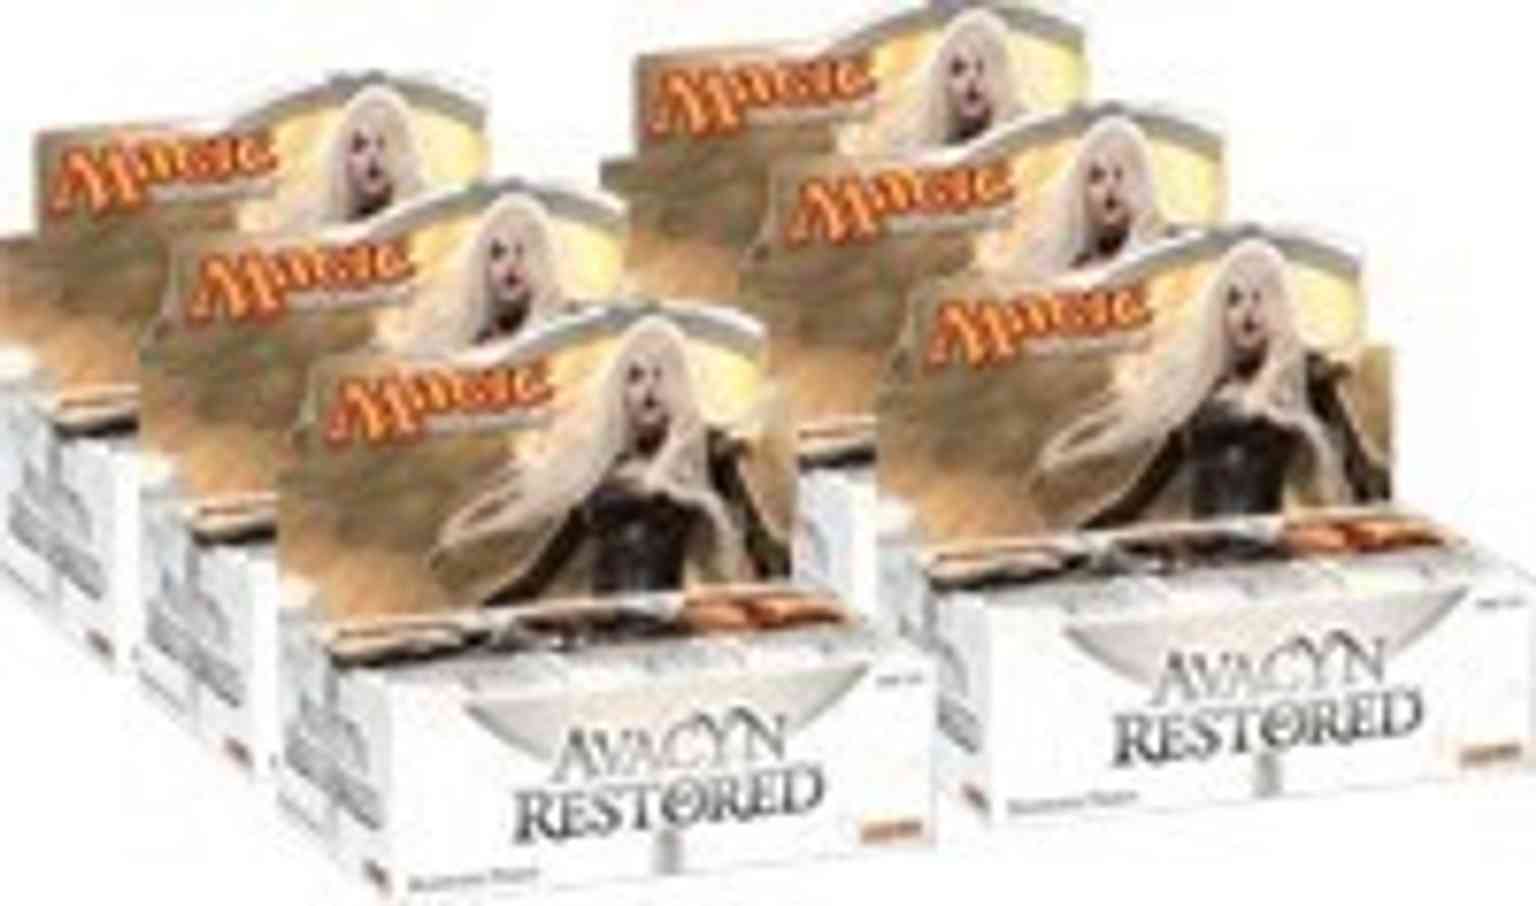 Avacyn Restored - Booster Box Case (6 boxes) magic card front